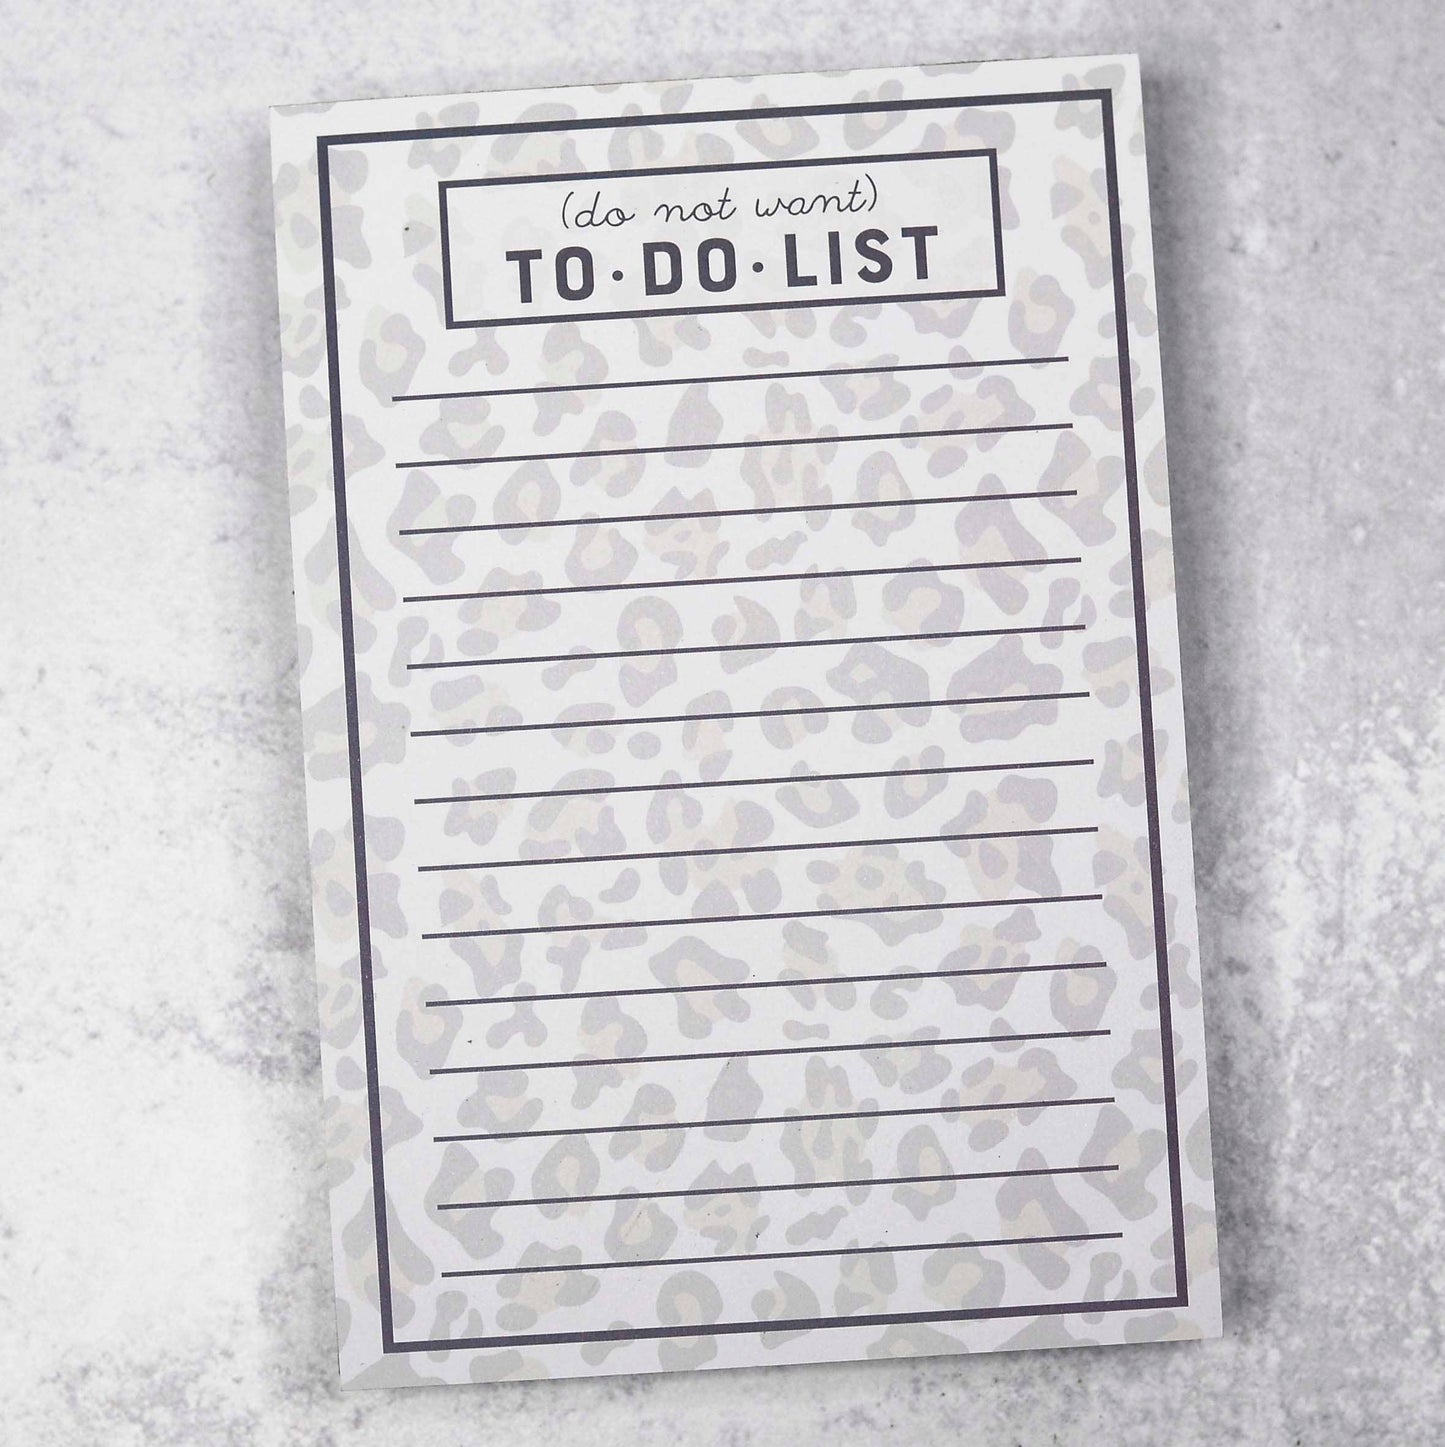 Do Not Want To Do List Notepad - Storm and Sky Shoppe - Mugsby